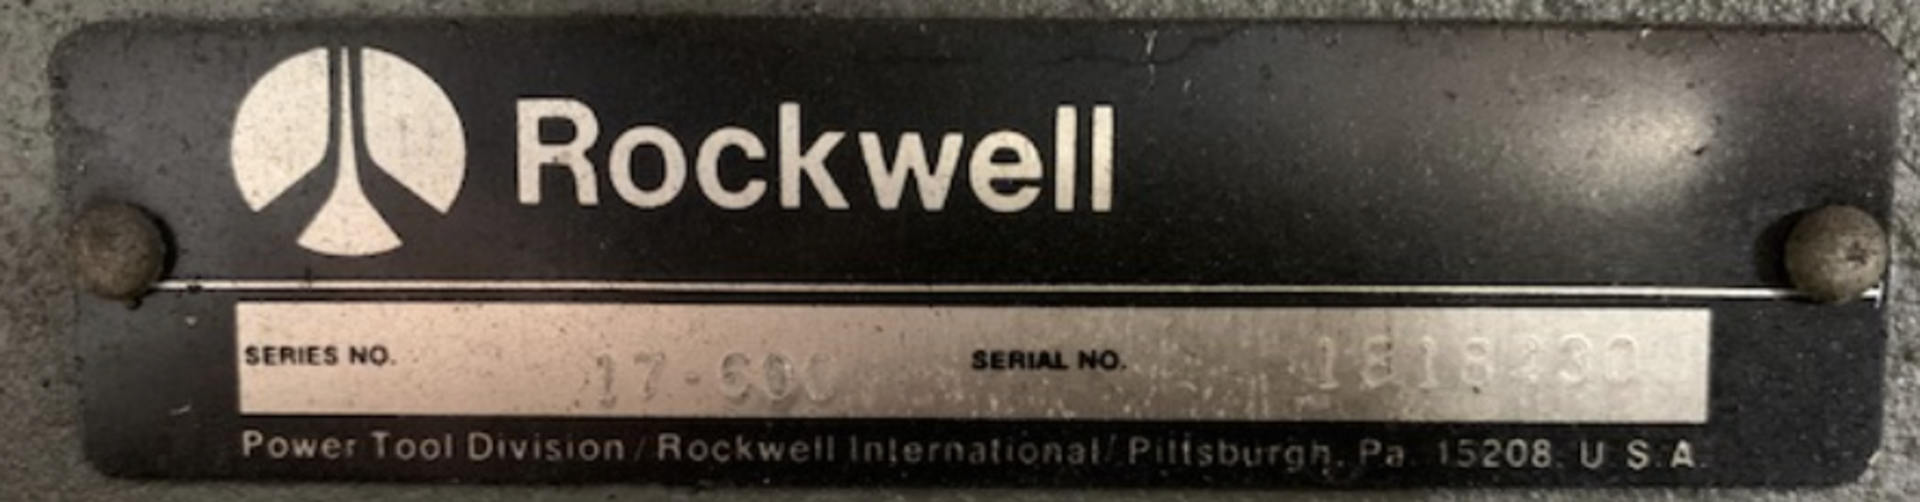 ROCKWELL DRILL PRESS (MUST BE REMOVED BY DECEMBER 28) - Image 2 of 2